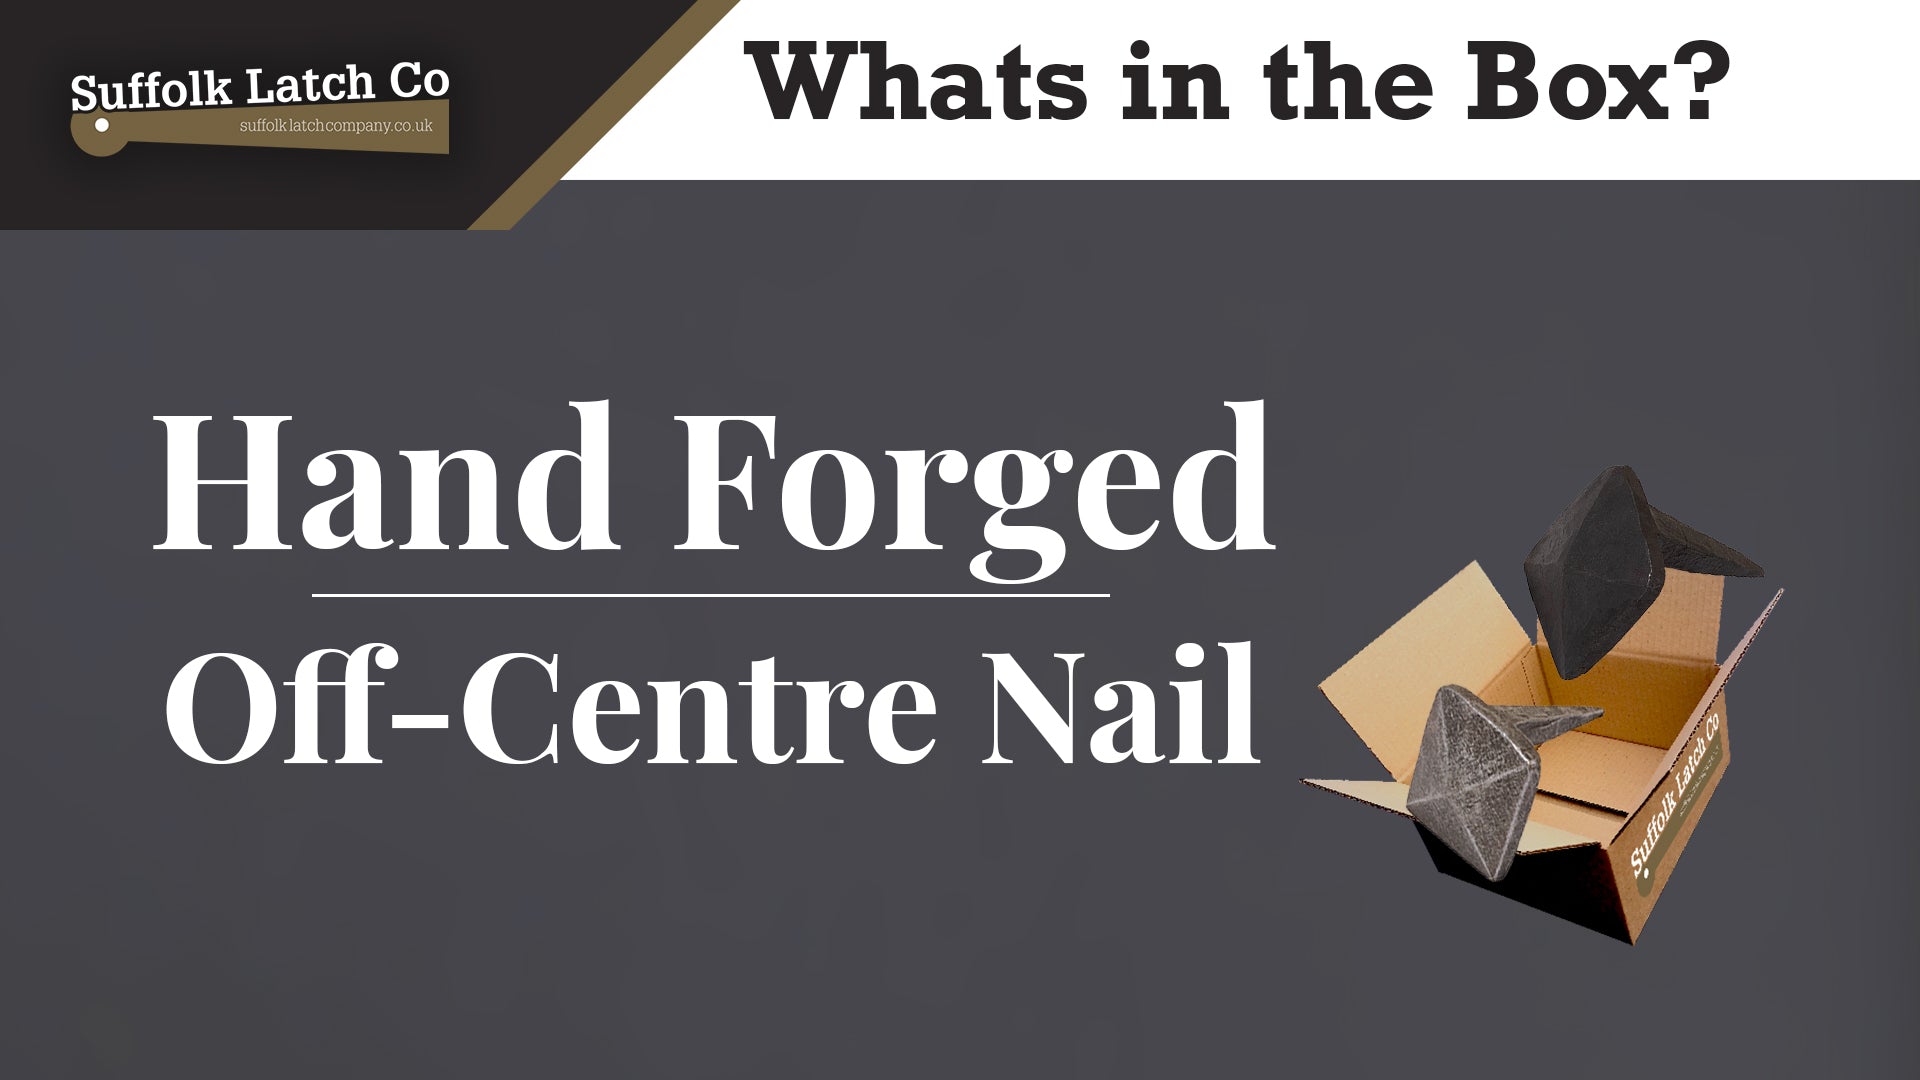 What's in the Box: Hand Forged Nail Off-Centre